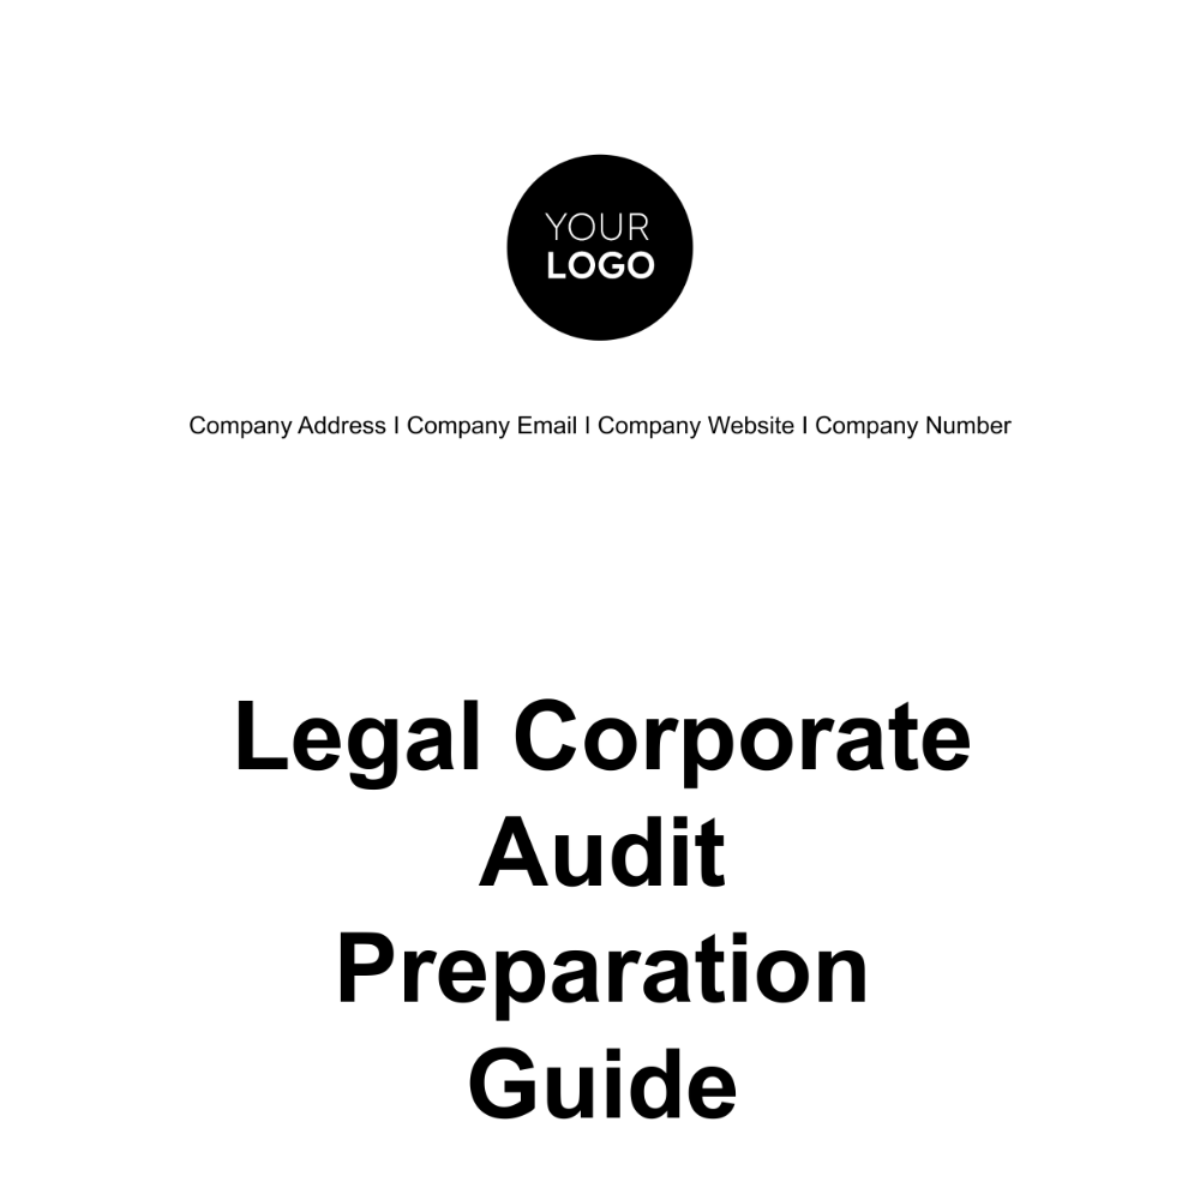 Free Legal Corporate Audit Preparation Guide Template